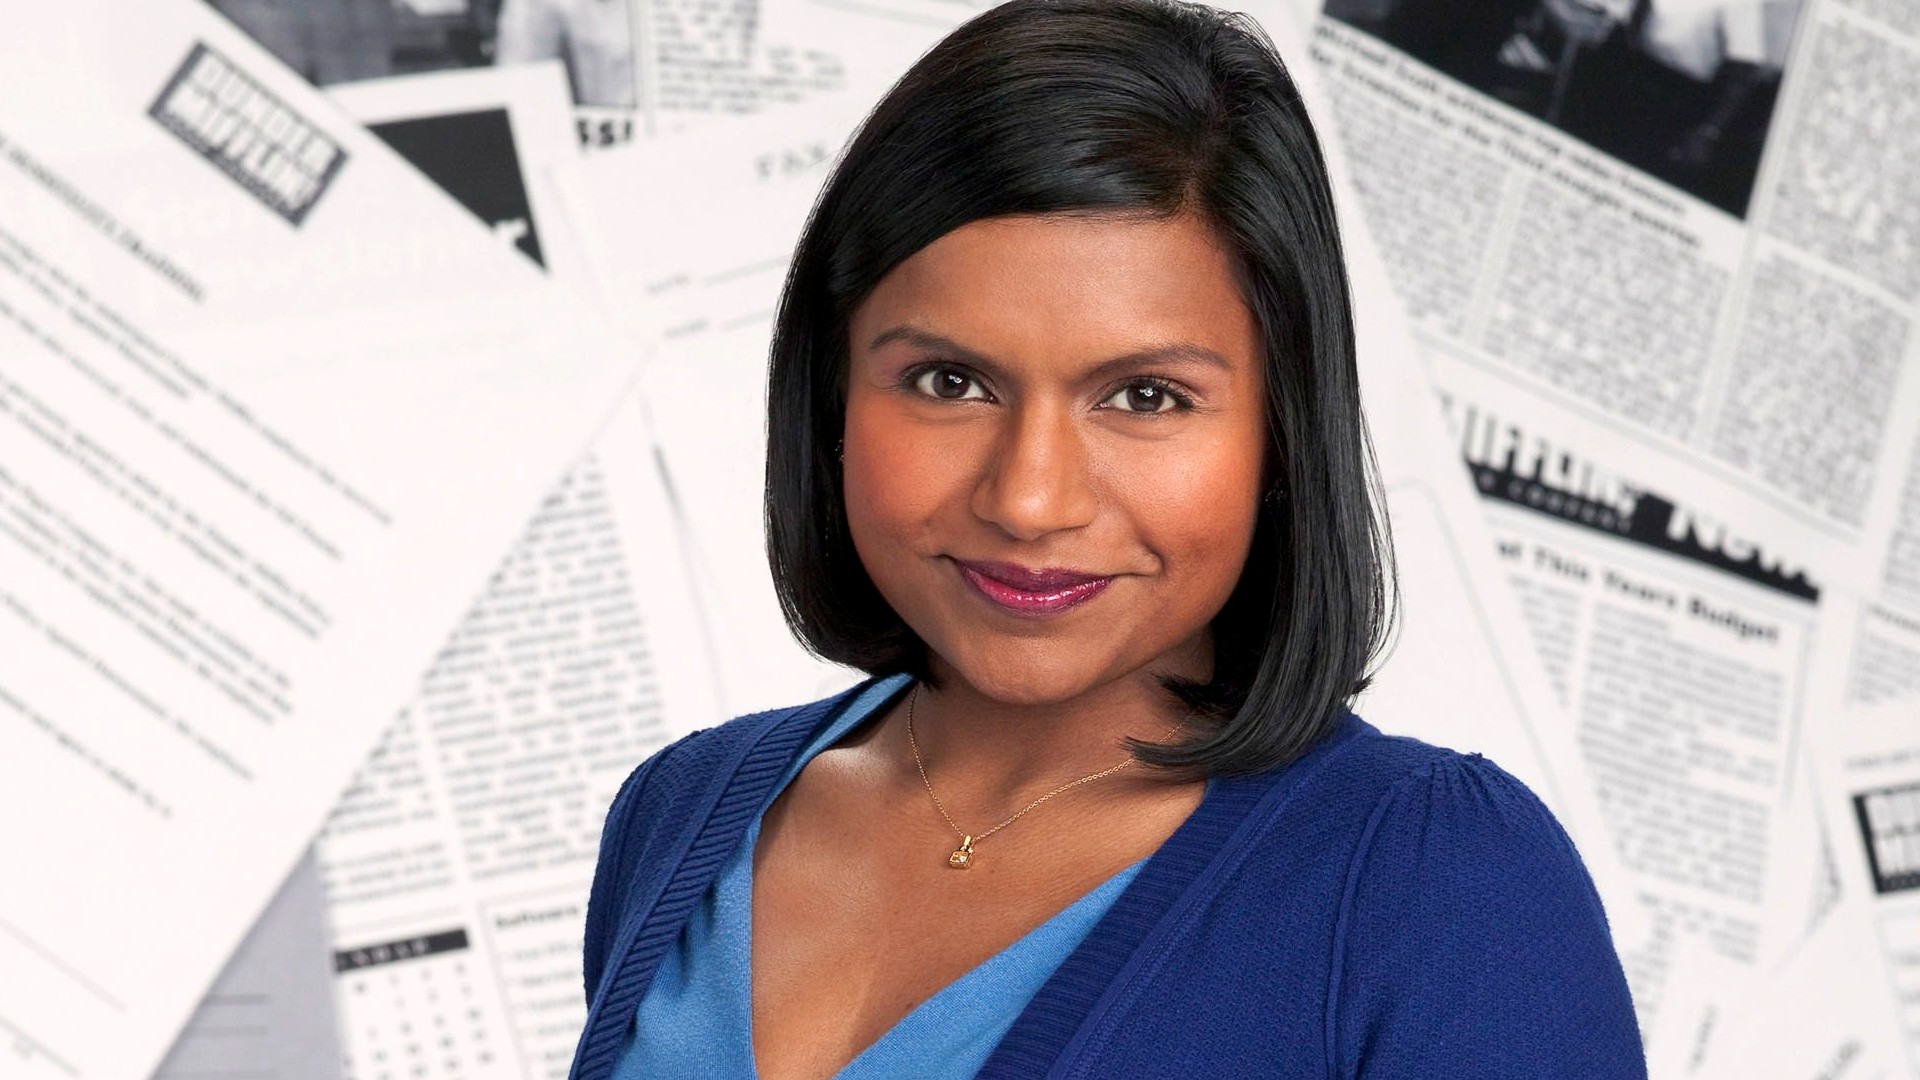 Mindy Kaling's Take on Why the Office Wouldn't Survive the Cancel Culture